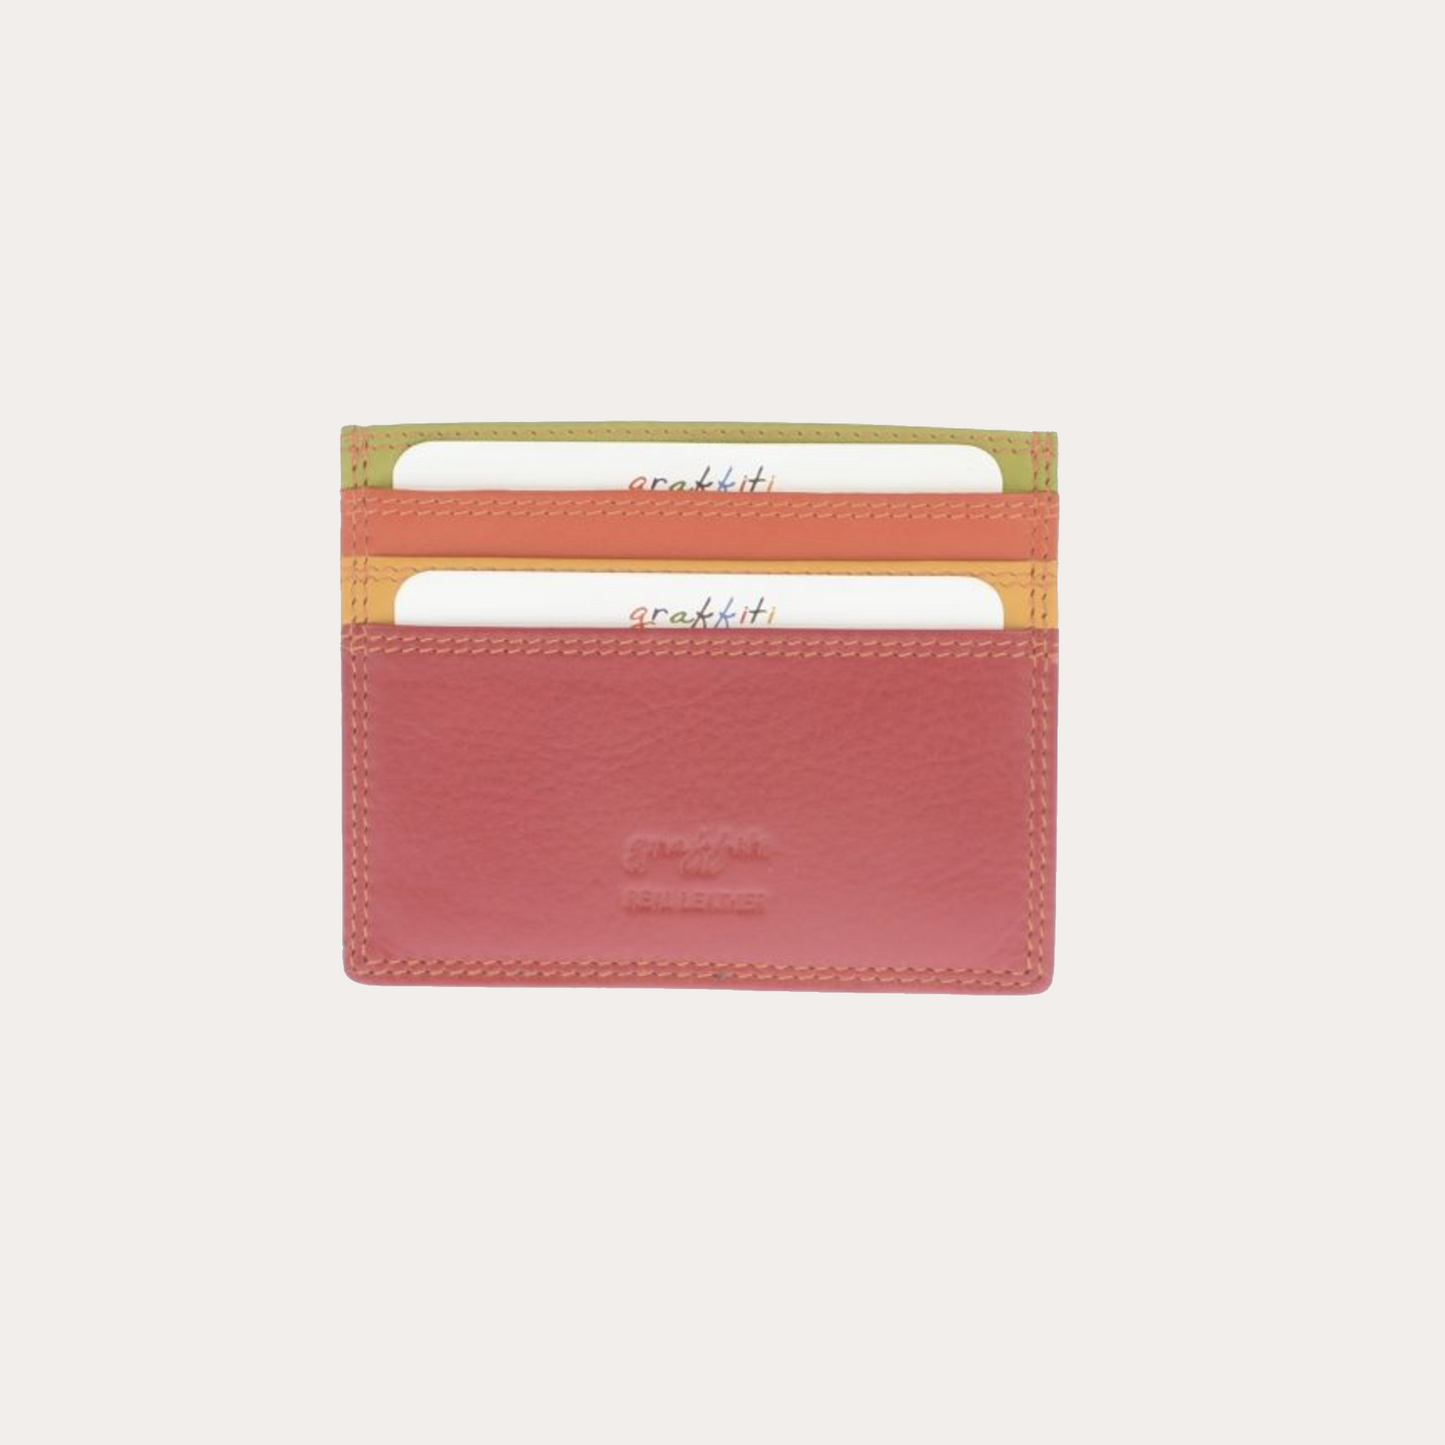 Spice Leather Credit Card Holder